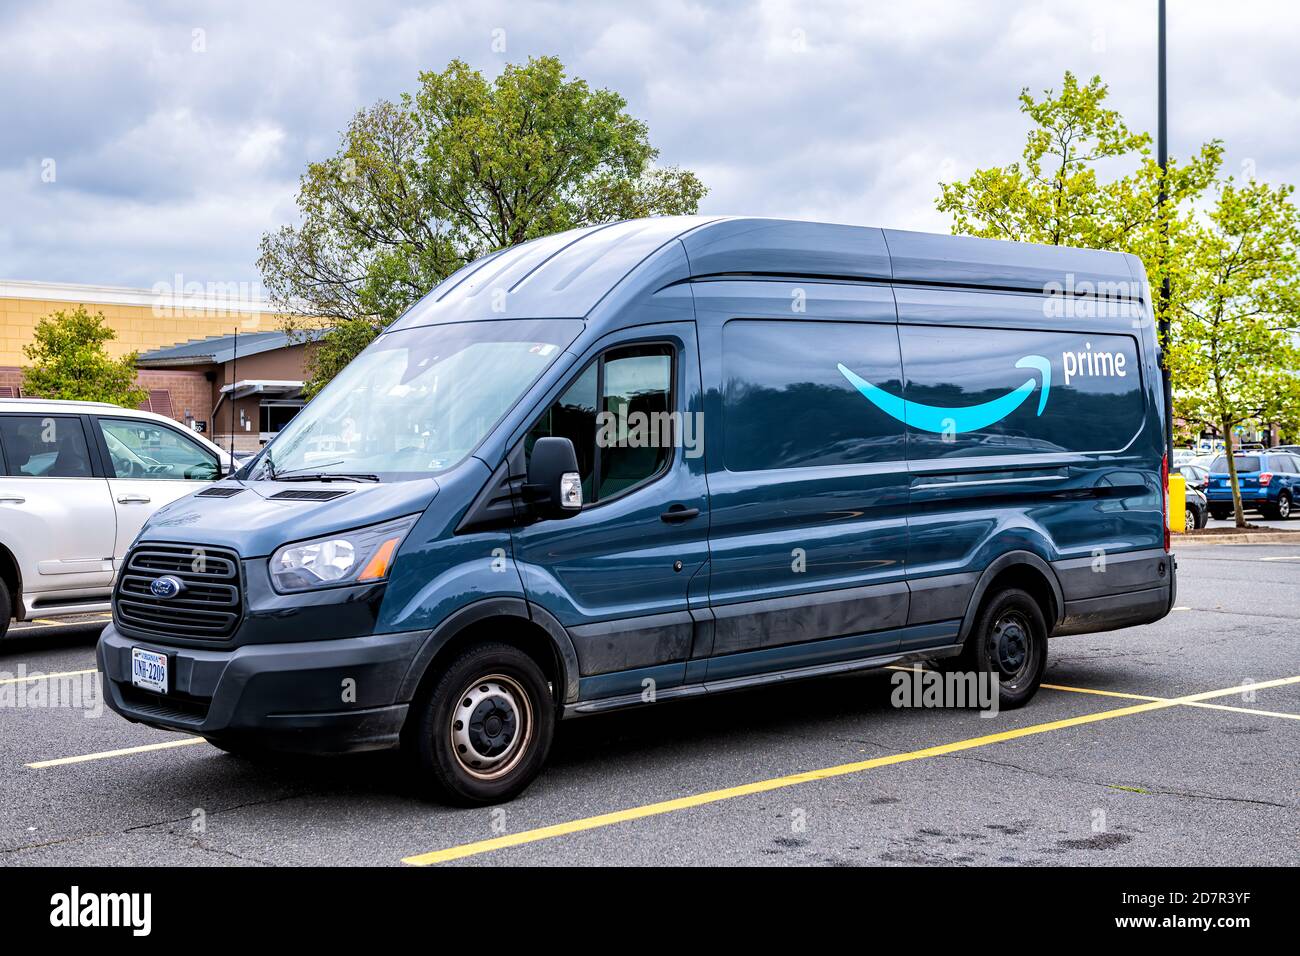 Sterling, USA - September 12, 2020: Amazon delivery van vehicle parked on  parking lot of Walmart retail store with Prime logo on car Stock Photo -  Alamy